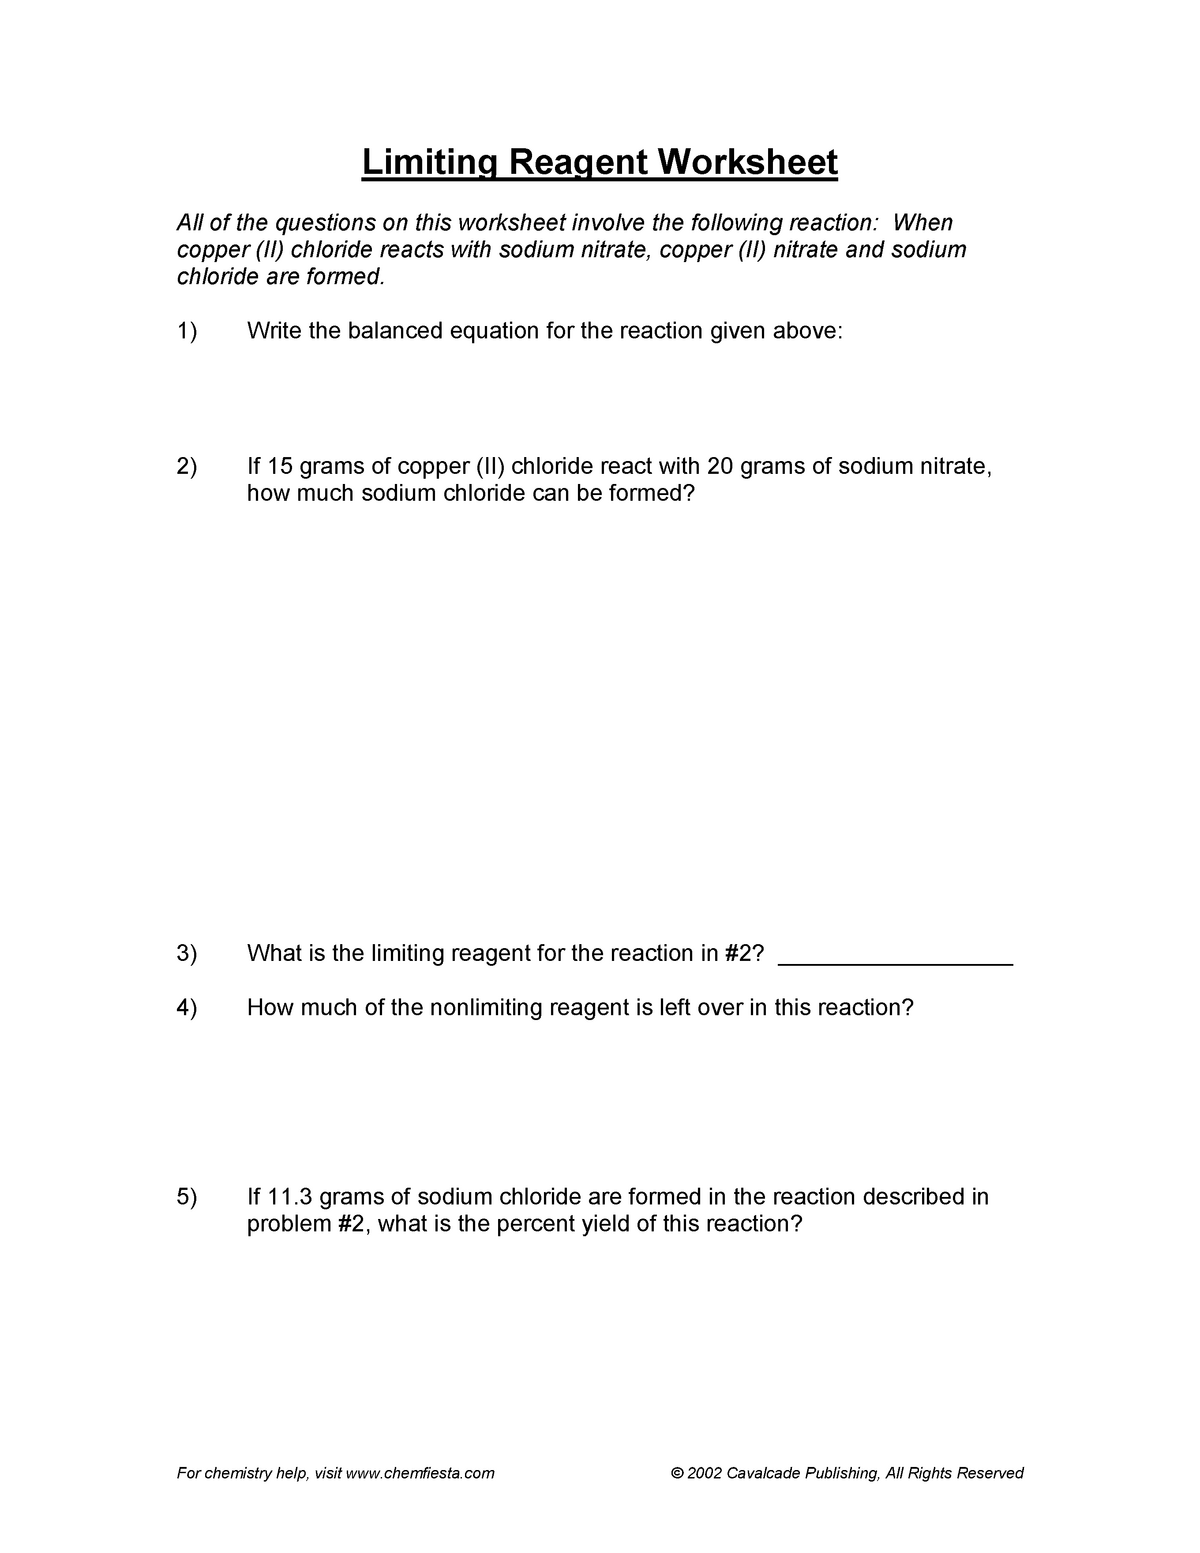 Limiting reagent worksheet - For chemistry help, visit chemfiesta Intended For Limiting Reactant Worksheet Answers